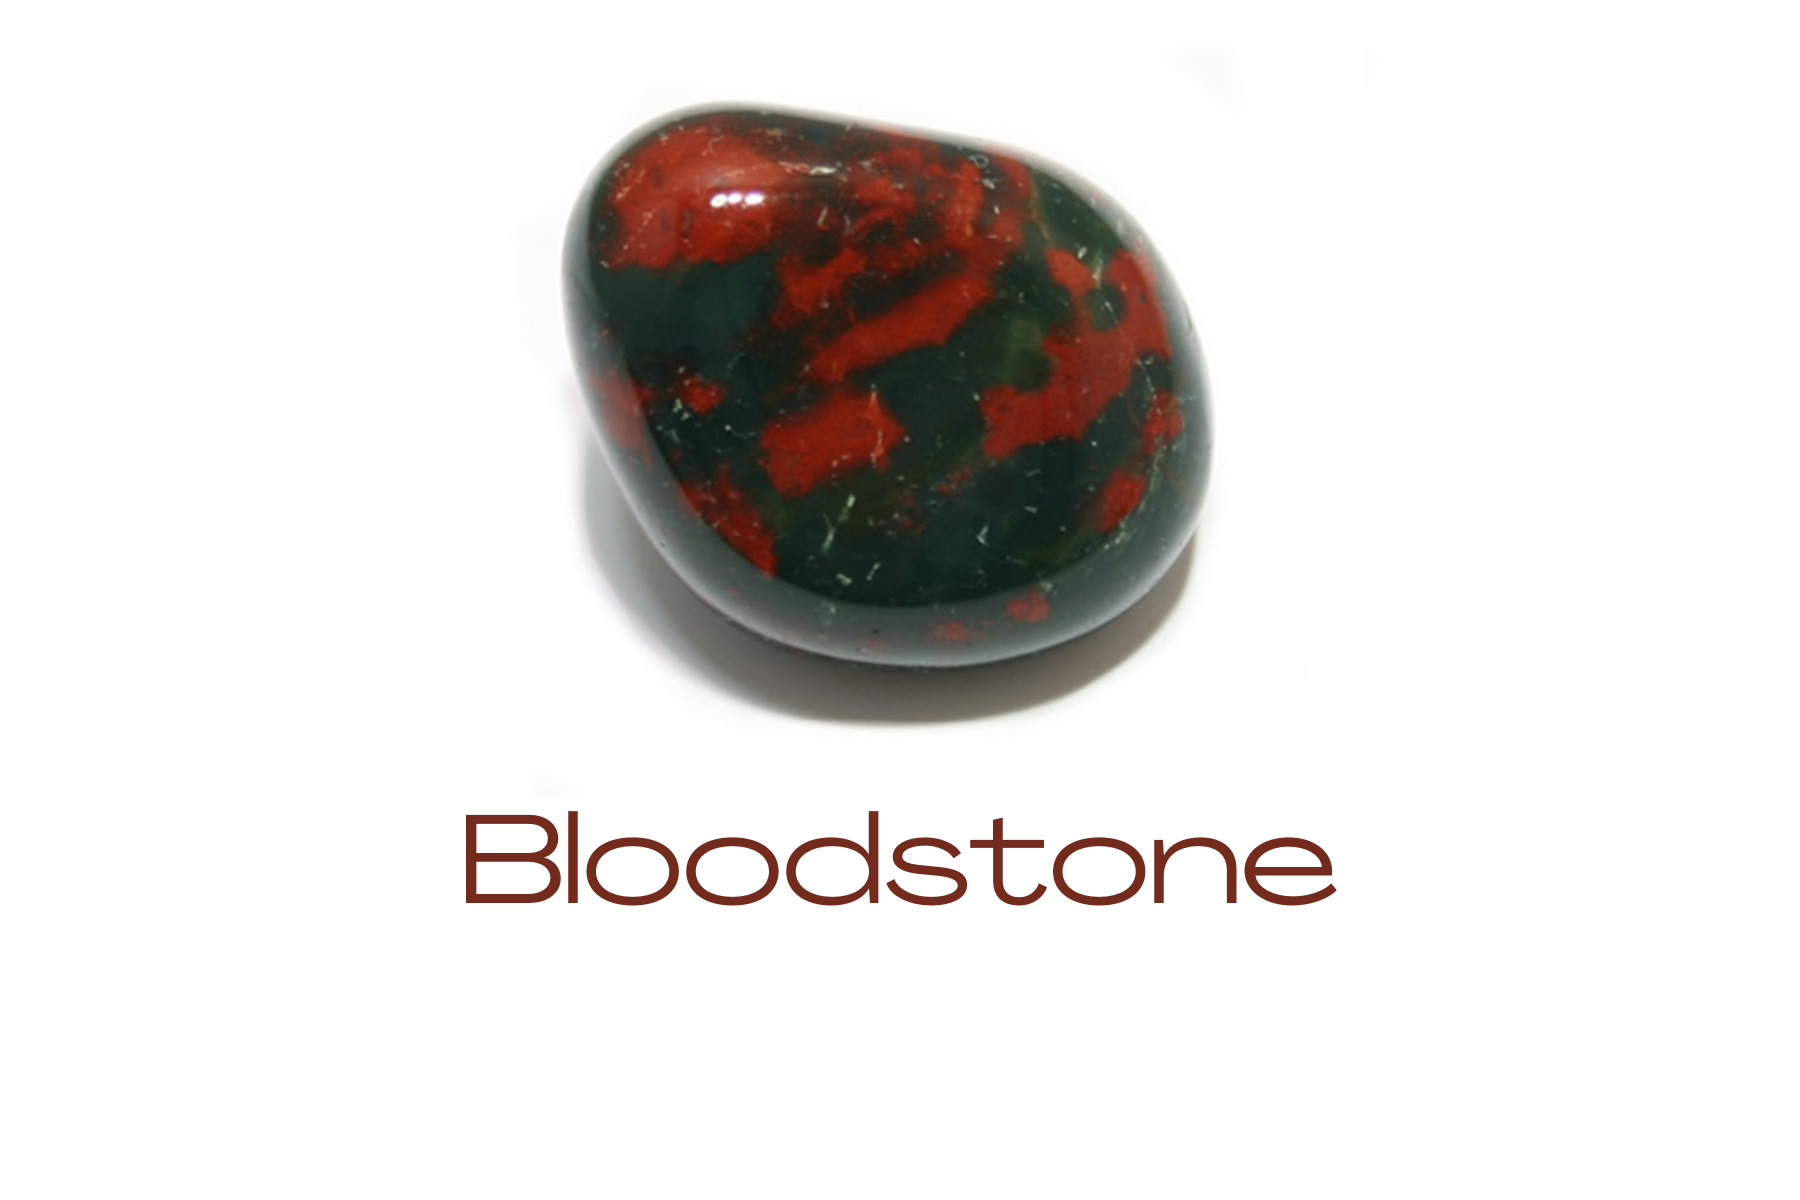 Bloodstone combined with black and red color